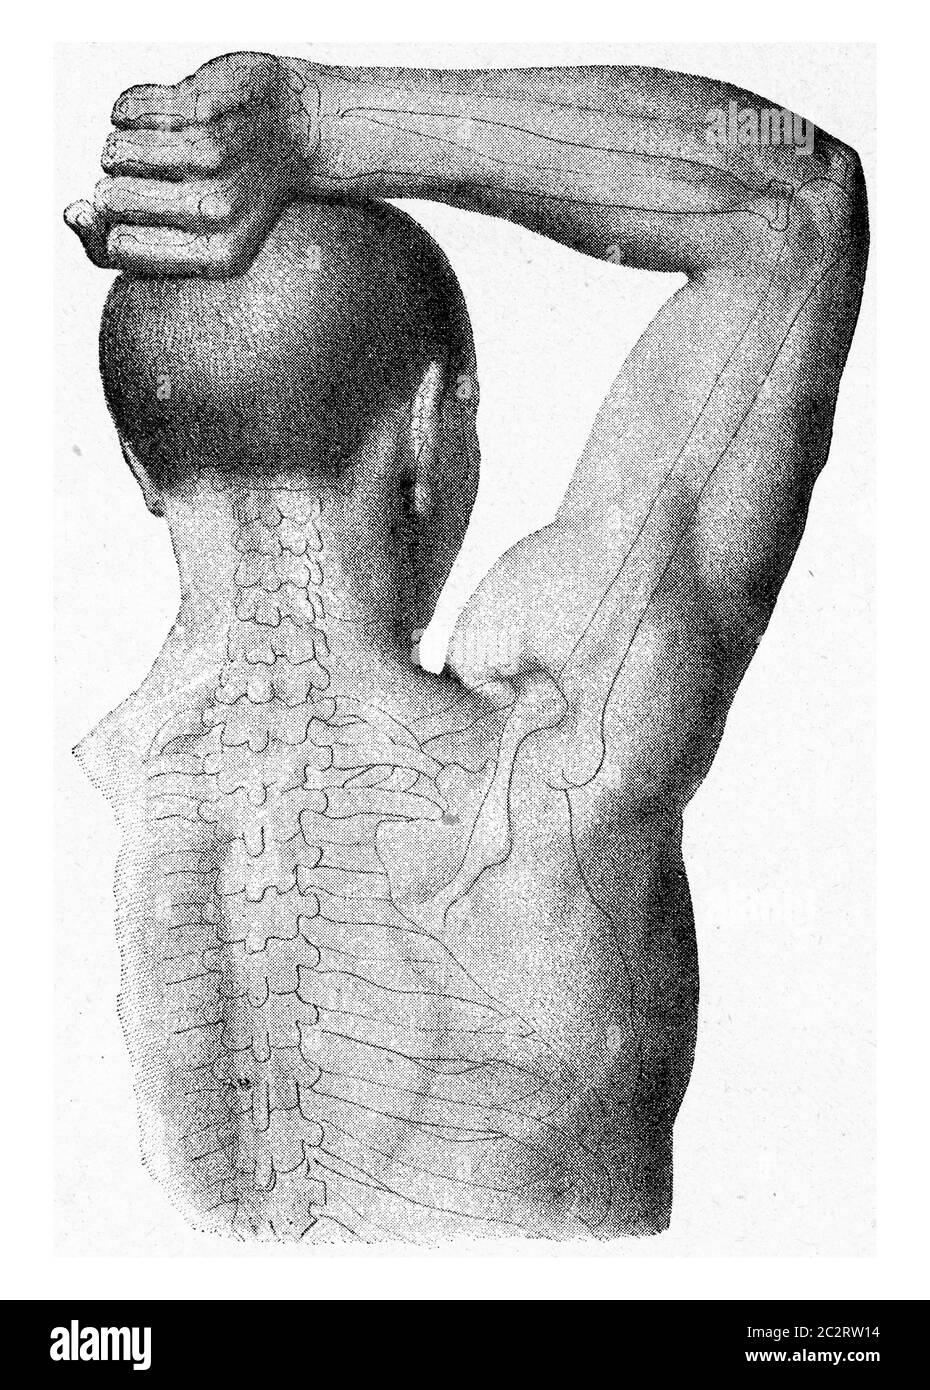 The muscles of the arm of the man hand being lifted, vintage engraved illustration. From the Universe and Humanity, 1910. Stock Photo